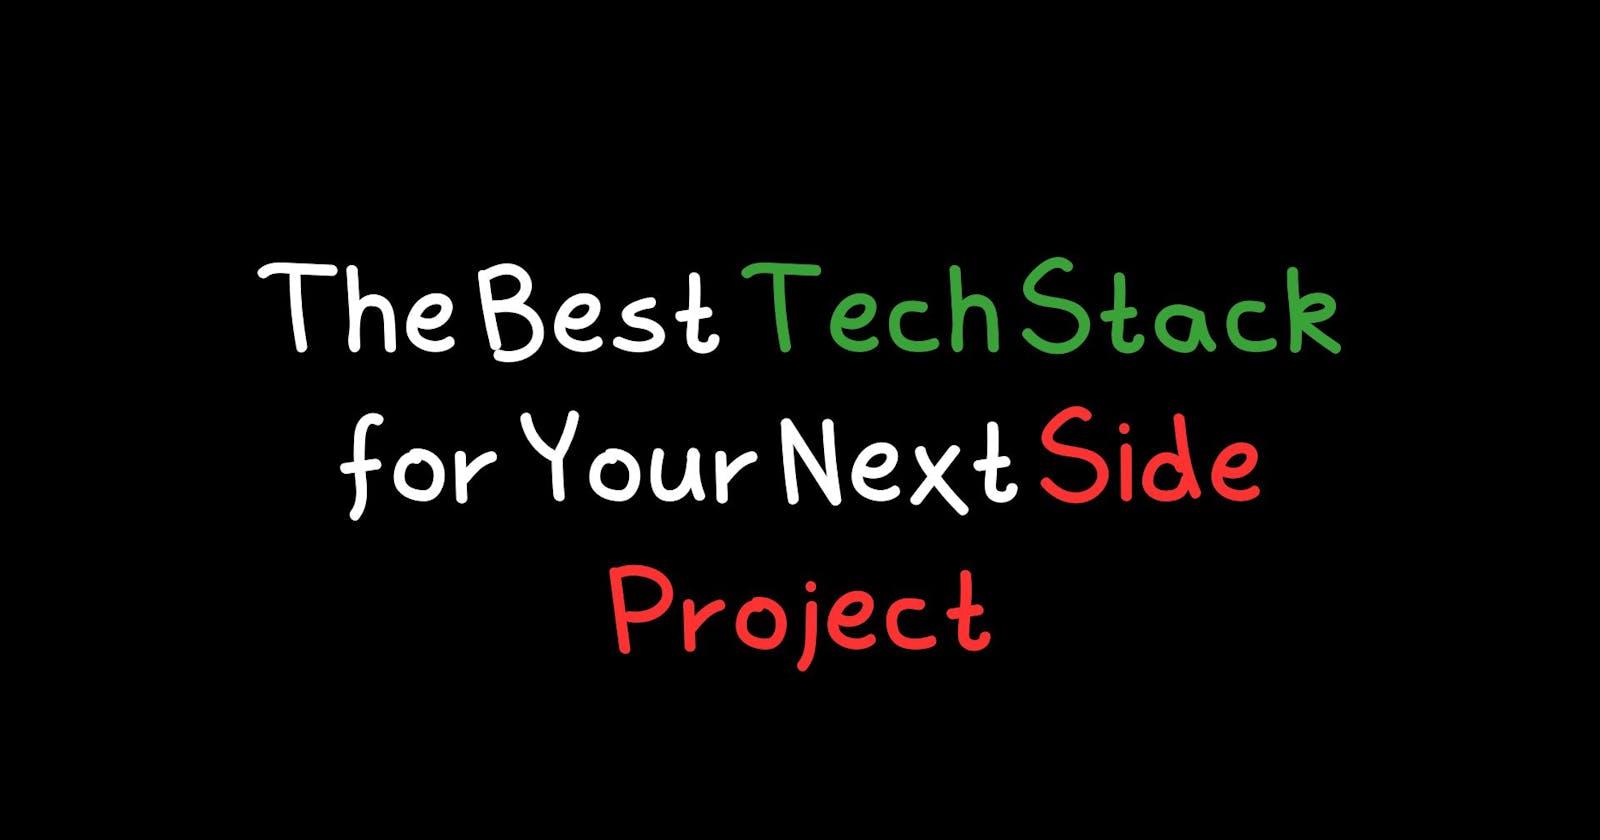 The Best Tech Stack for Your Next Side Project